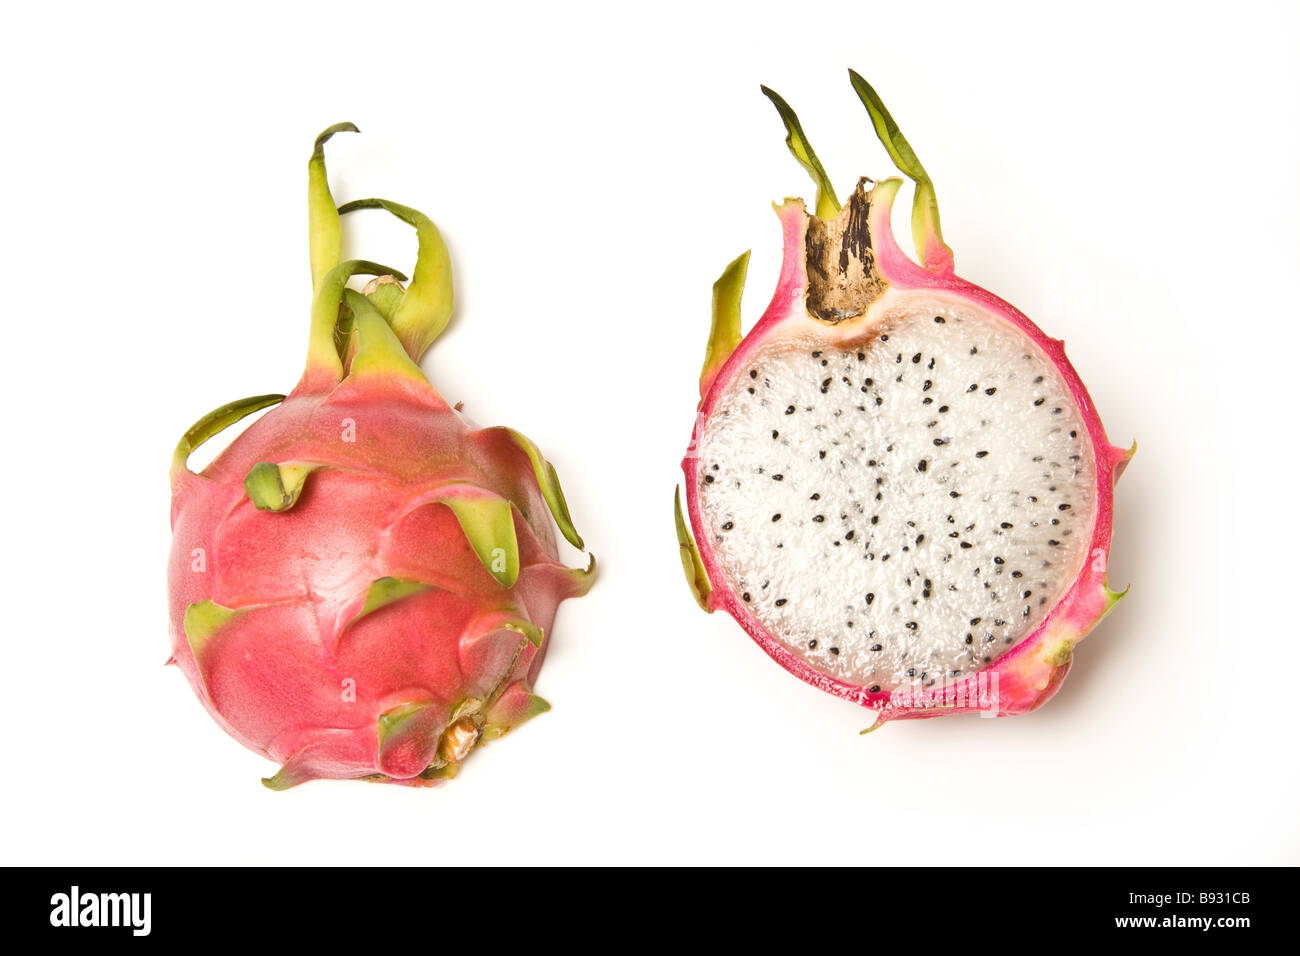 Dragon fruit isolated on a white background studio Banque D'Images